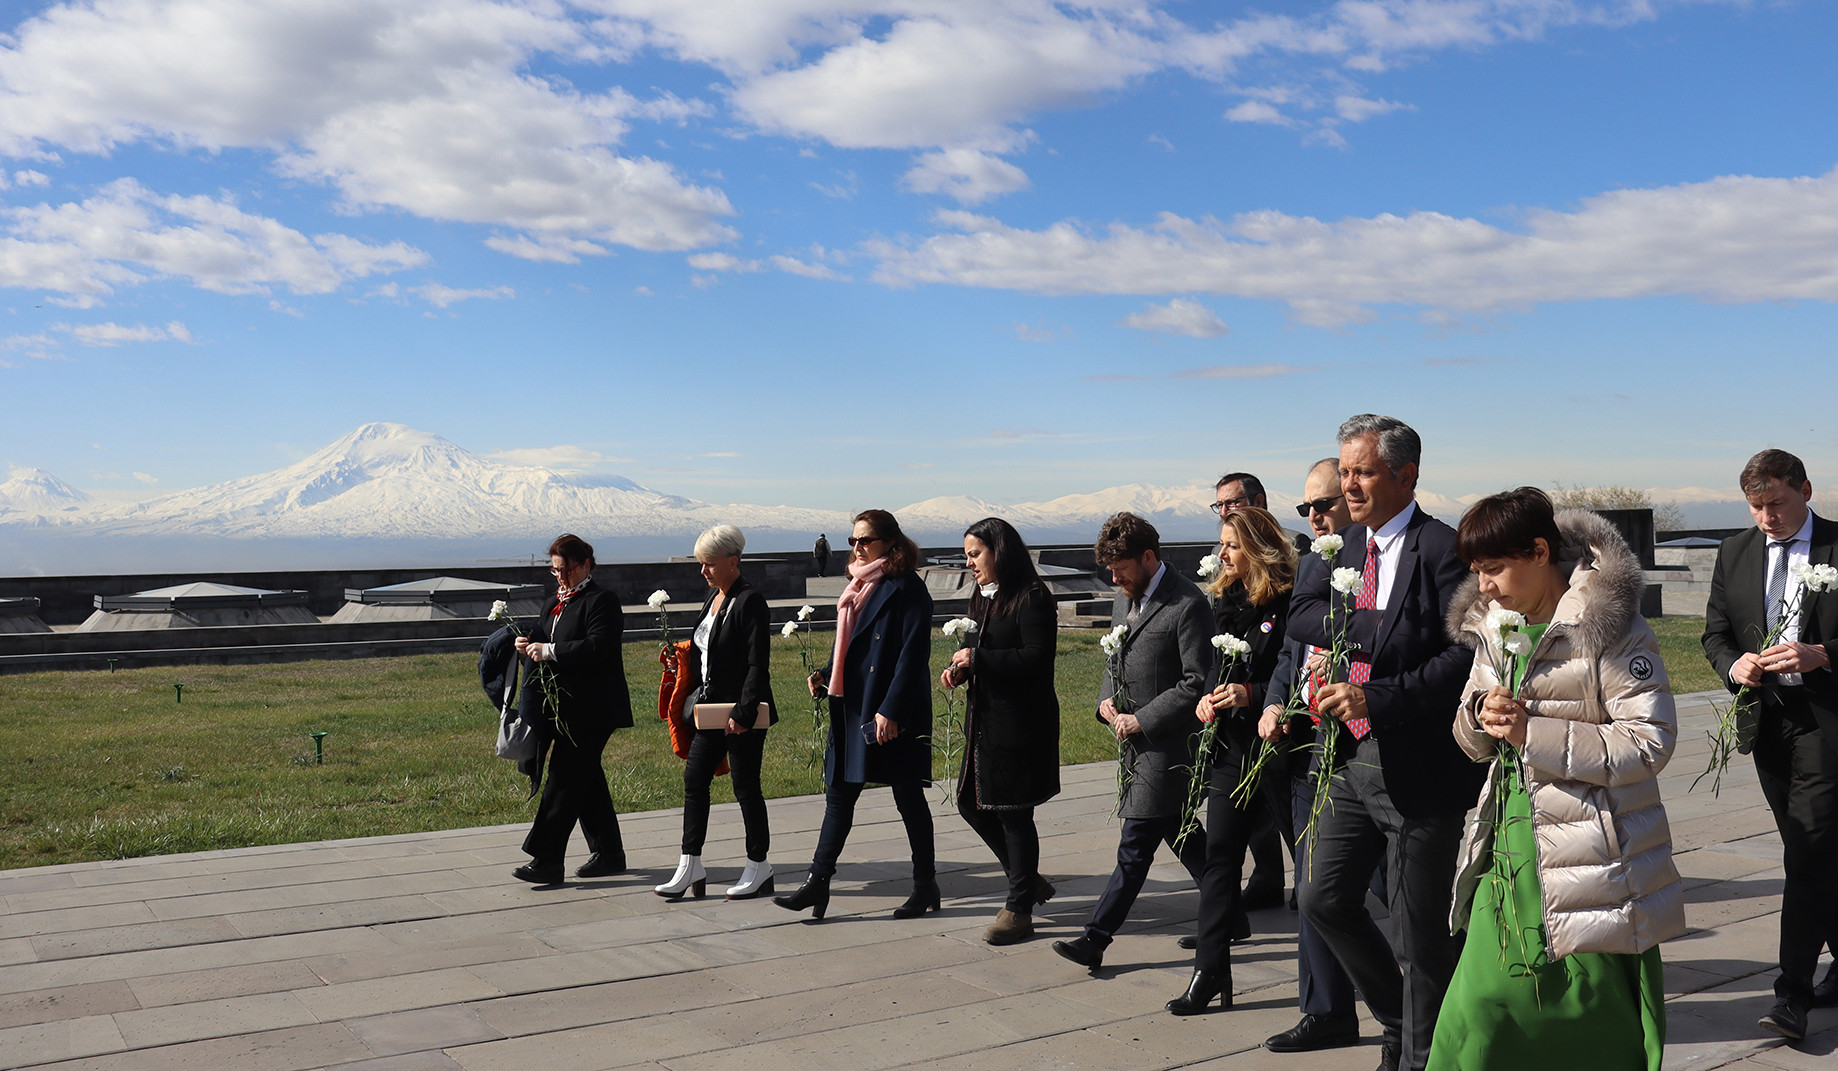 France-Armenia friendship group of National Assembly of France visited Armenian Genocide Memorial